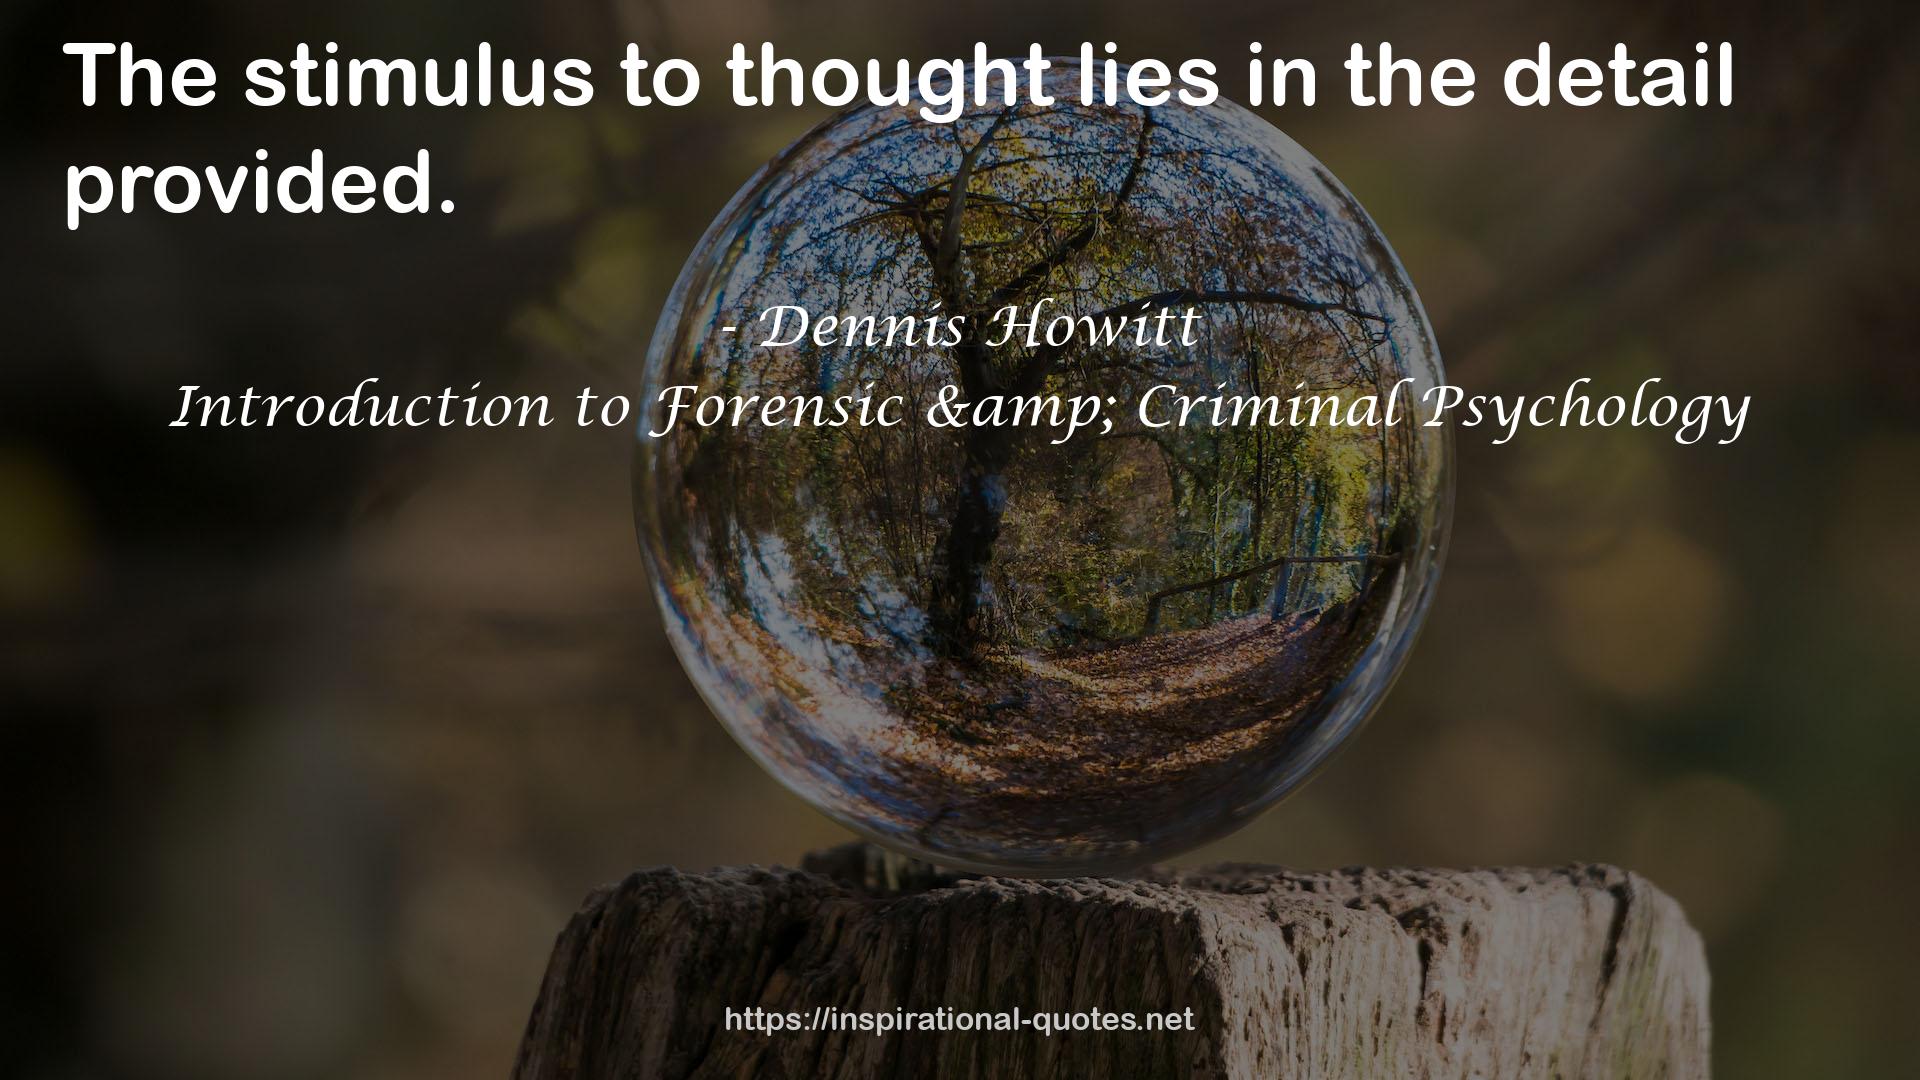 Introduction to Forensic & Criminal Psychology QUOTES